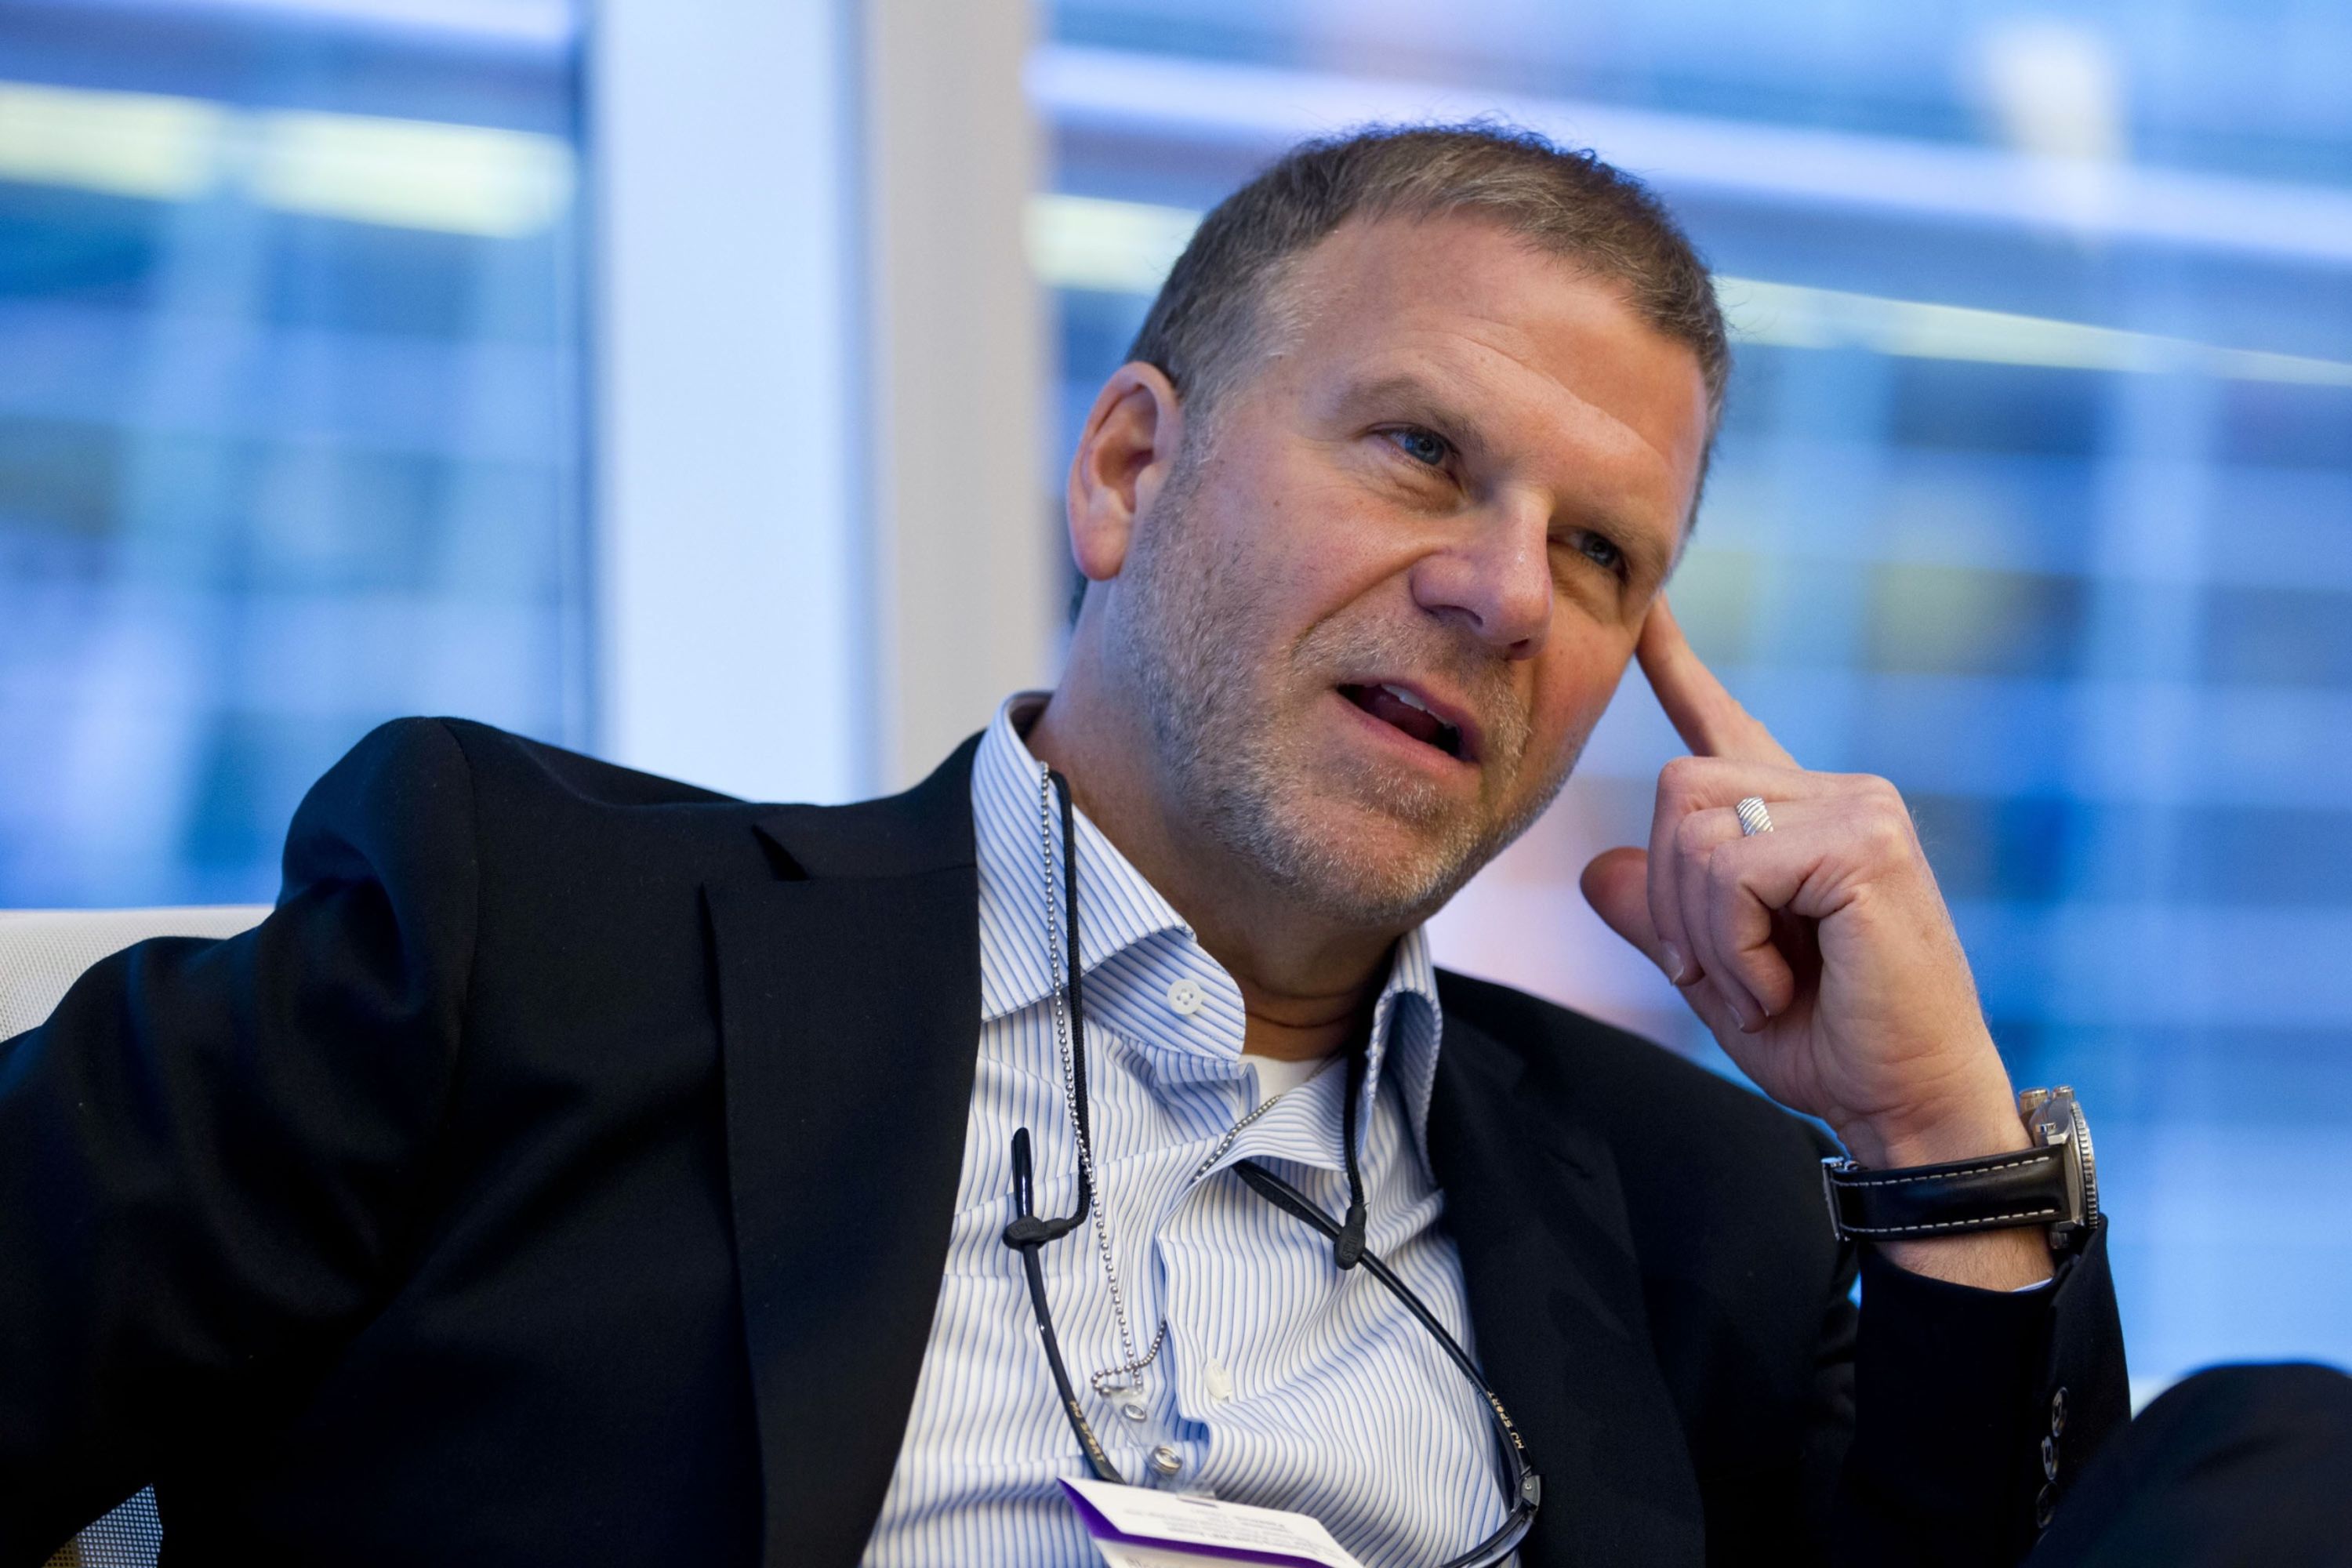 Tilman Fertitta, chief executive officer of Landry's Inc., speaks during an interview in New York, U.S. (Photo: Bloomberg)